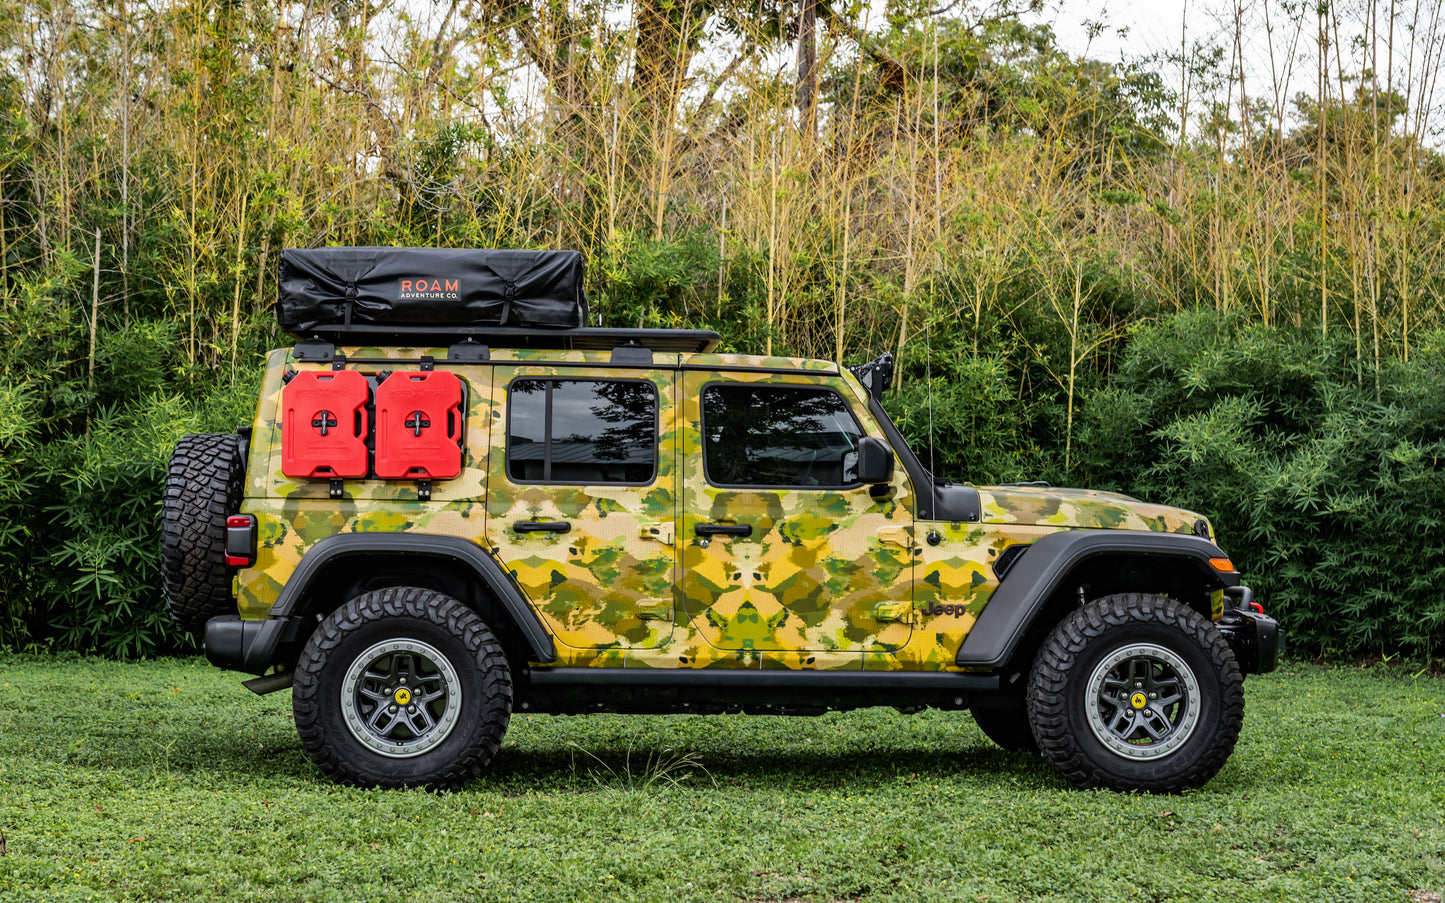 upgraded camo wrapped jeep wrangler rubicon for sale near kerrville boerne texas at hawkes outdoors 2102512882